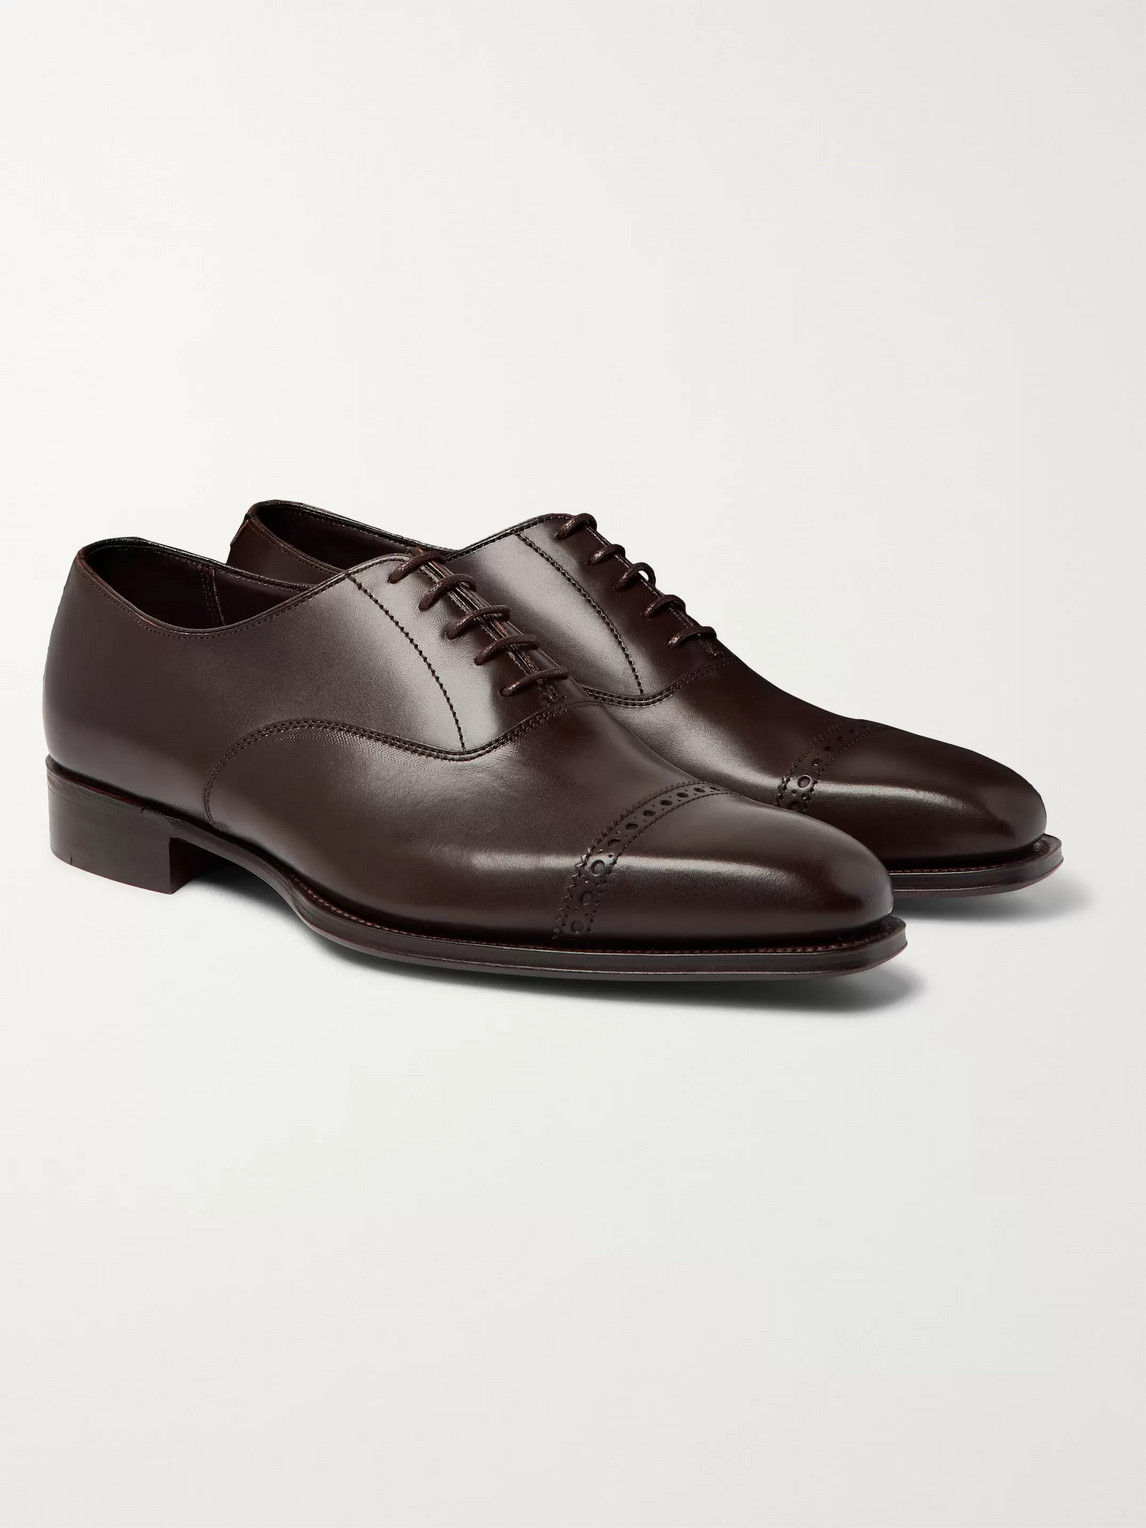 Kingsman George Cleverley Leather Oxford Shoes In Brown